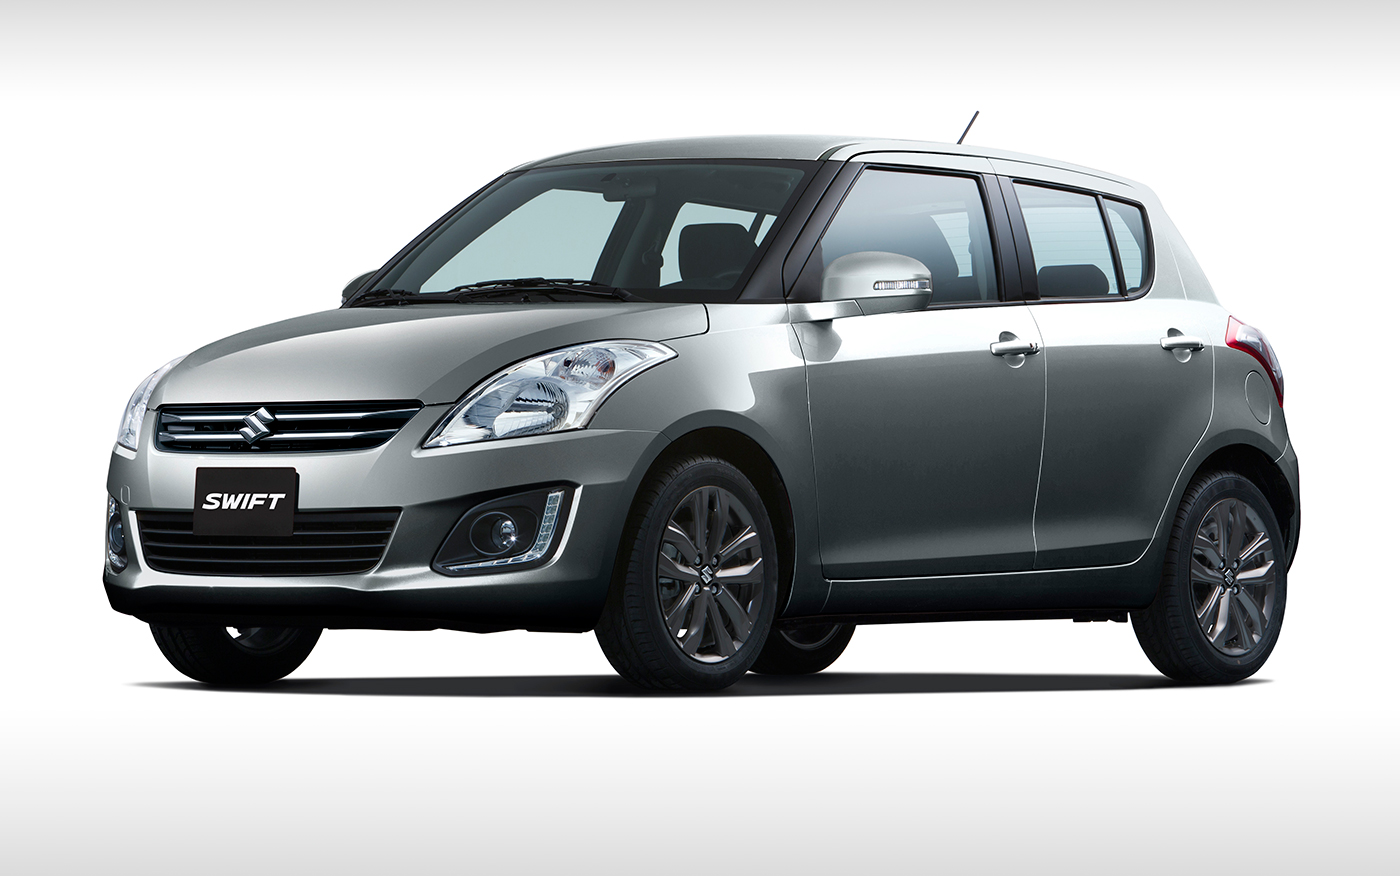 2015 Suzuki Swift pricing and specifications Photos (1 of 9)